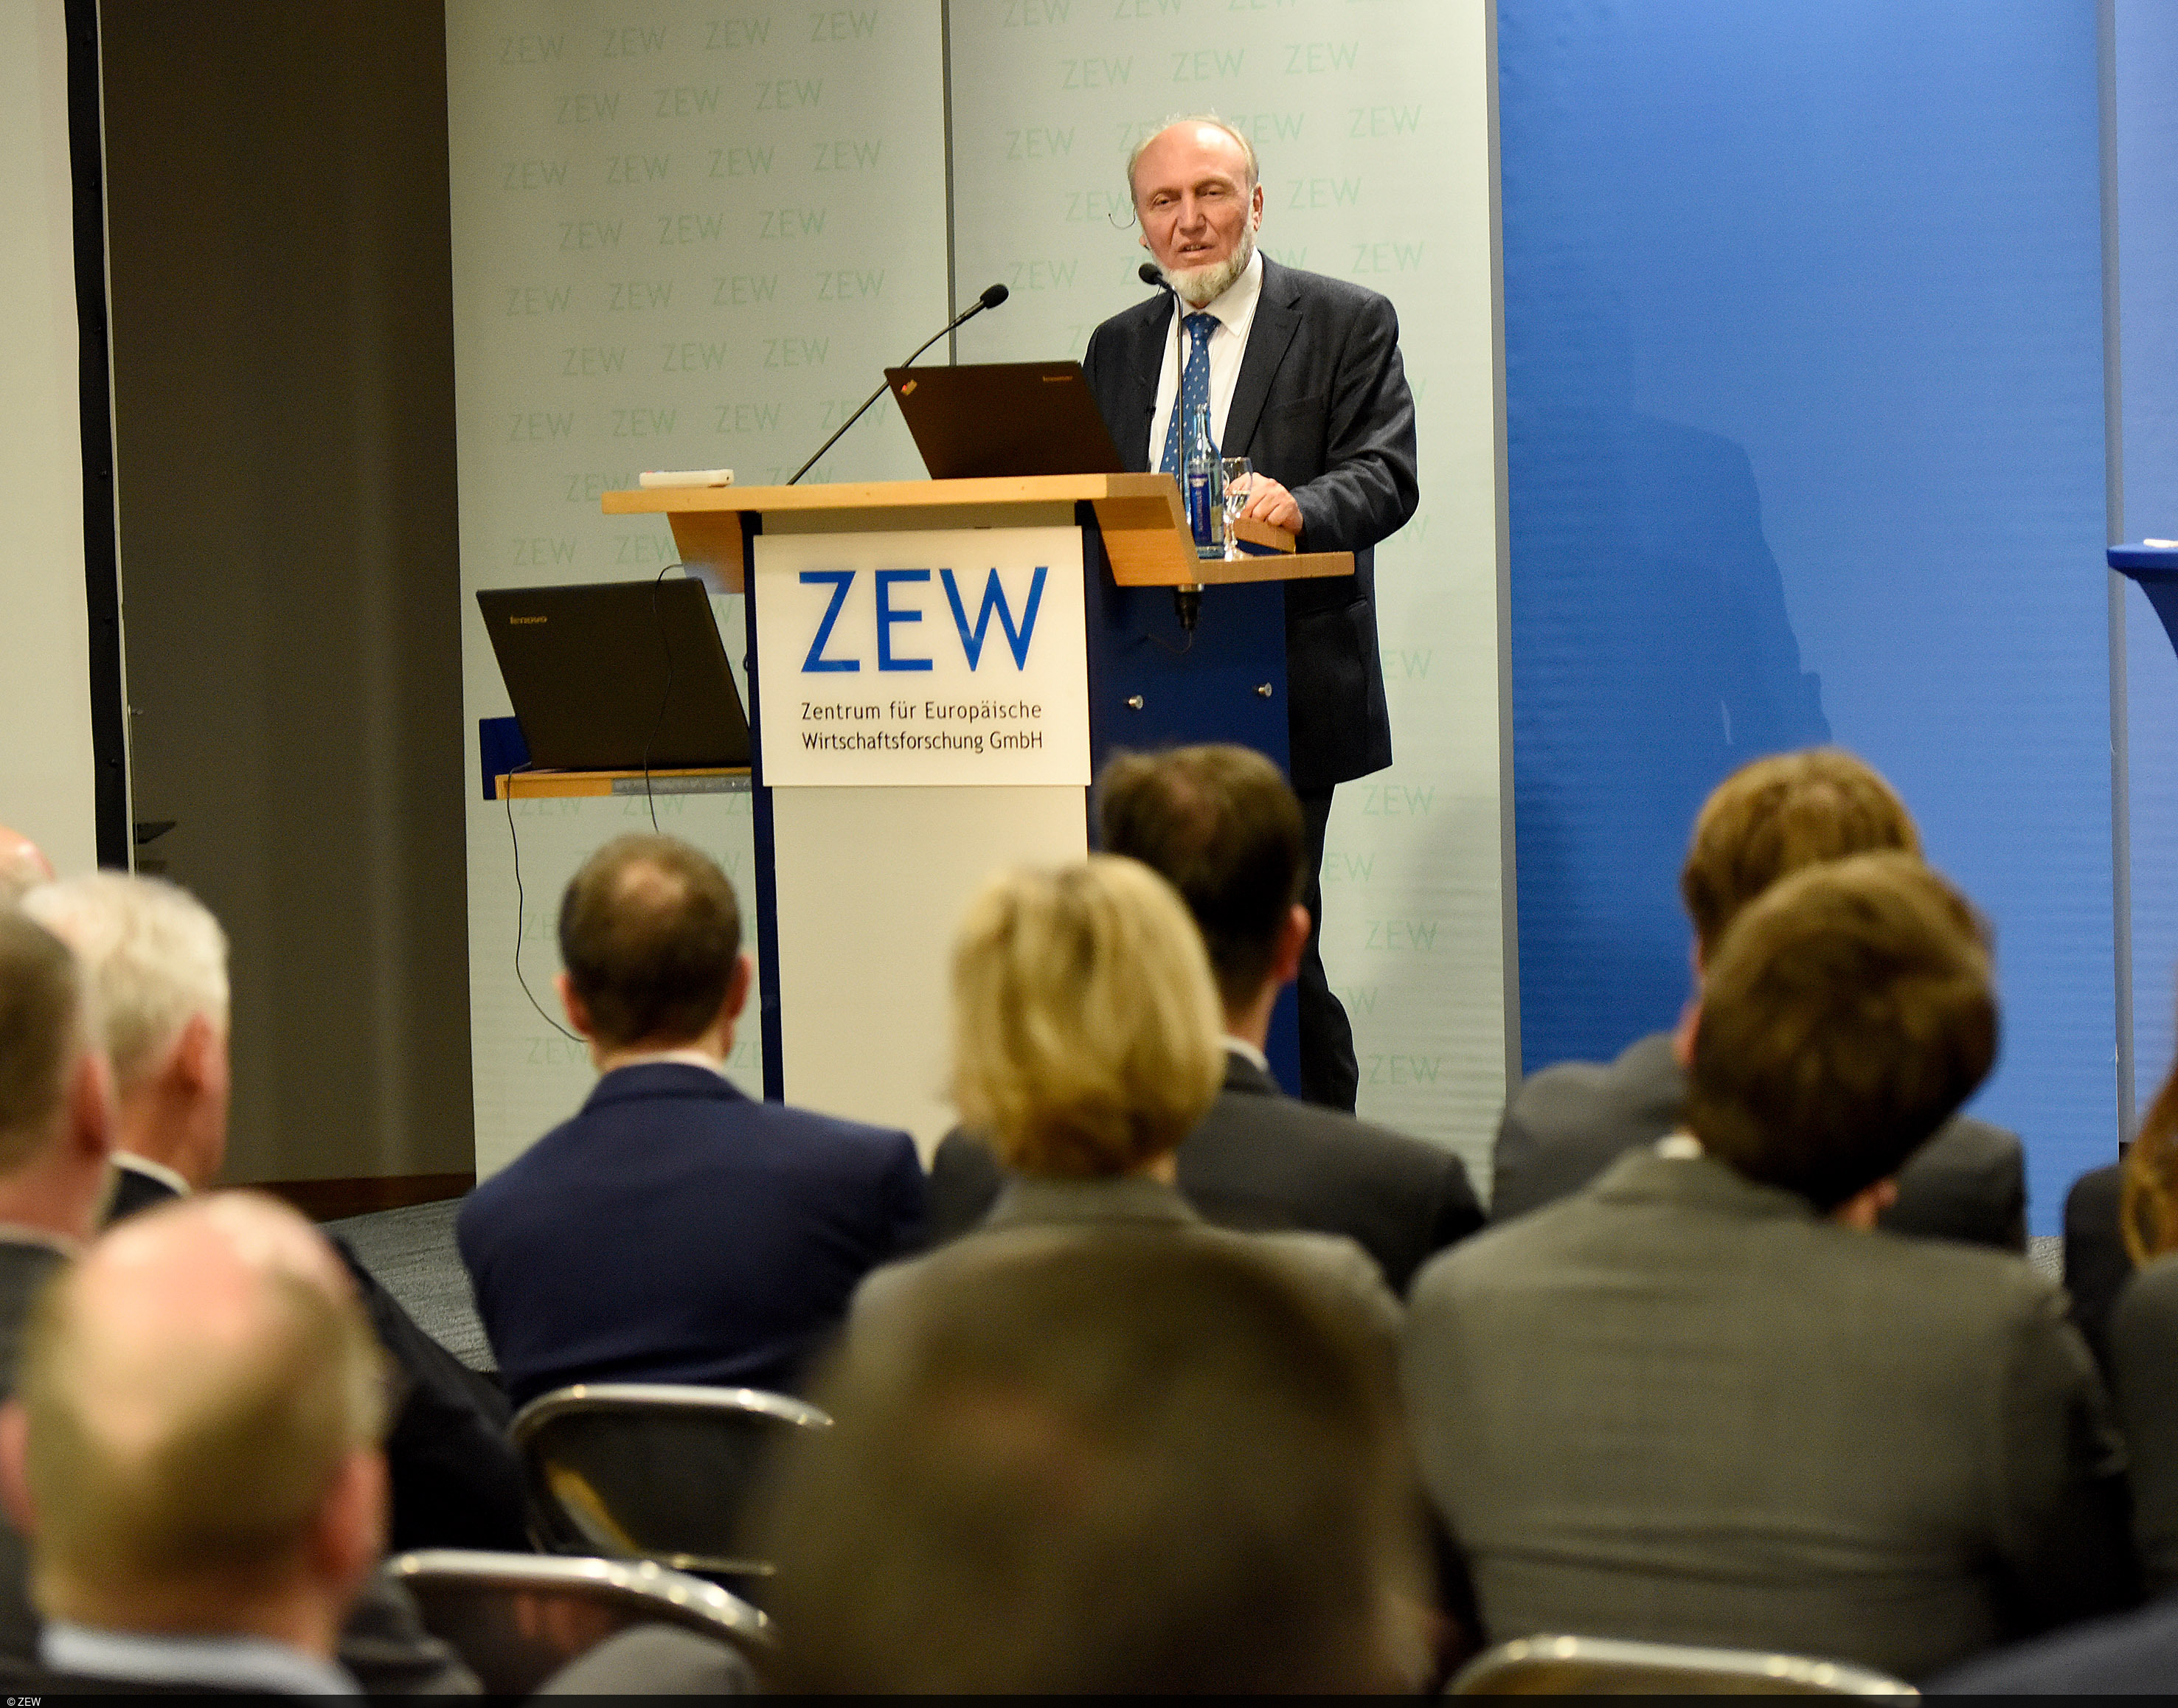 Hans-Werner Sinn presents his 15-point programme for a new Europe at ZEW